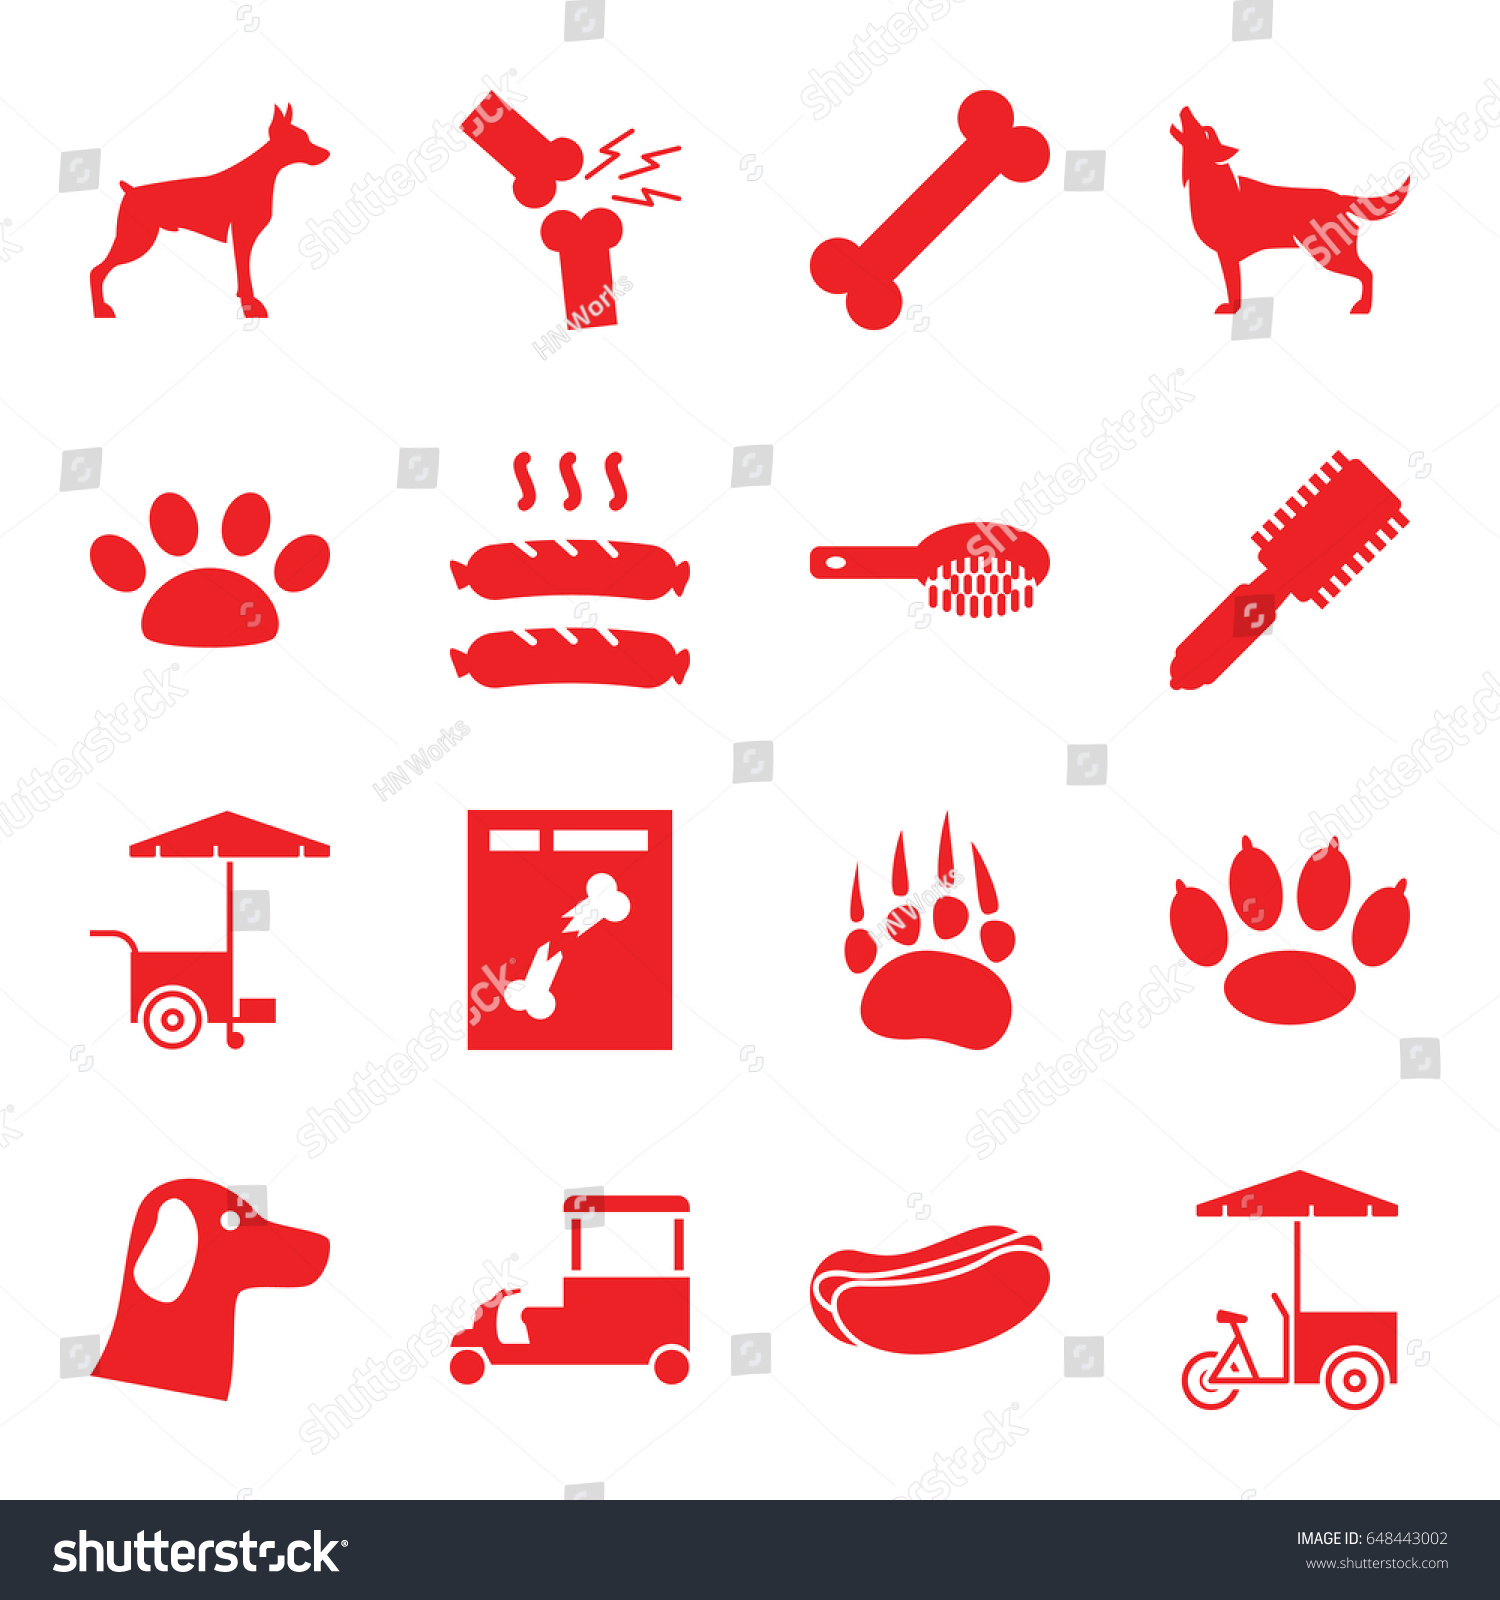 SVG of Dog icons set. set of 16 dog filled icons such as animal paw, wolf, hair brush, fast food cart, x ray, broken leg or arm, sausage, paw svg